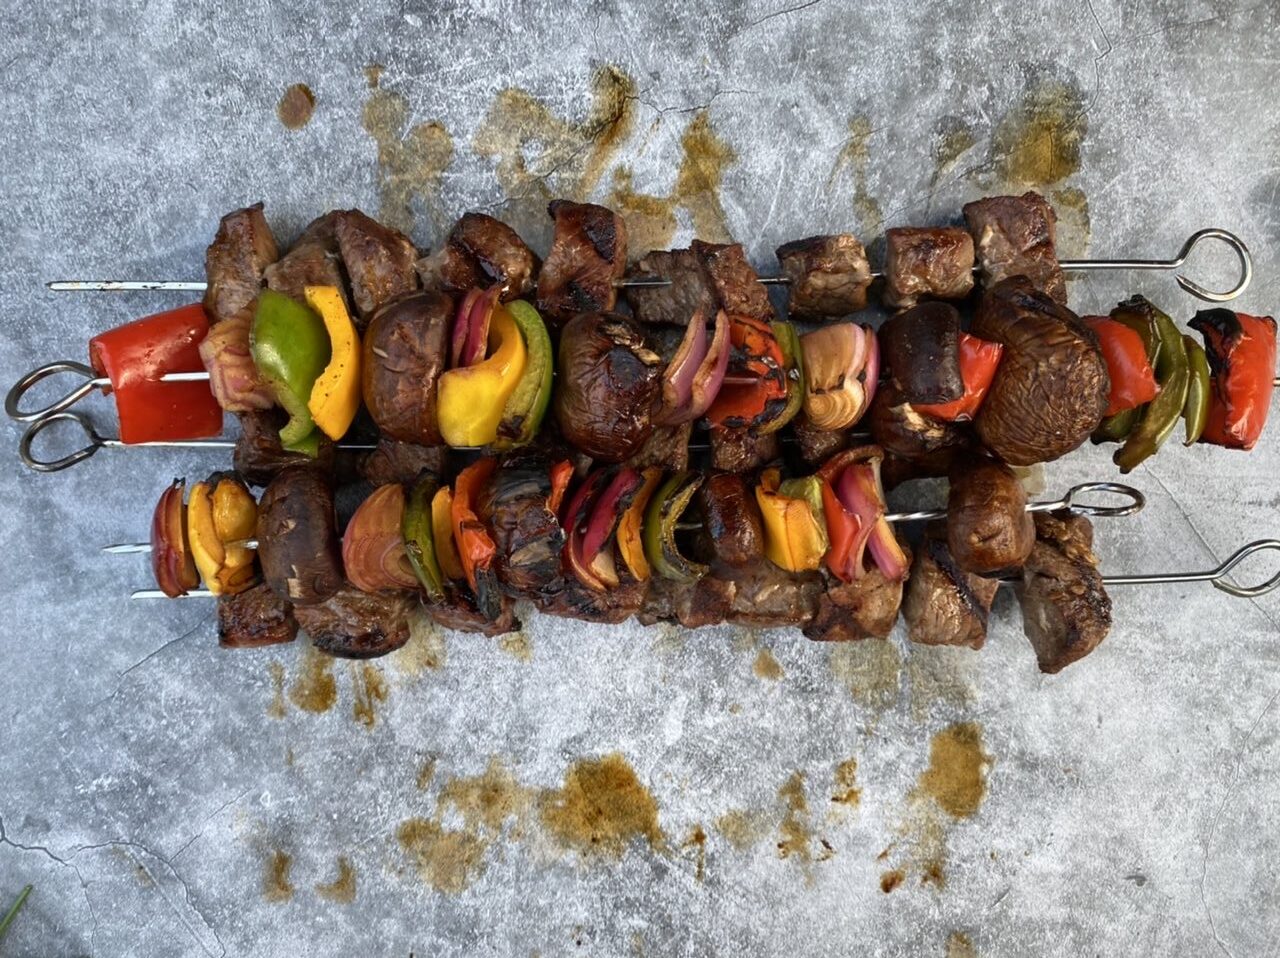 44EADC9C 19FE 43AD A0C0 83CC1F68B36B e1598571351329 - Amazing Vitamin Packed Steakhouse Shish Kebabs with Charred Vegetables